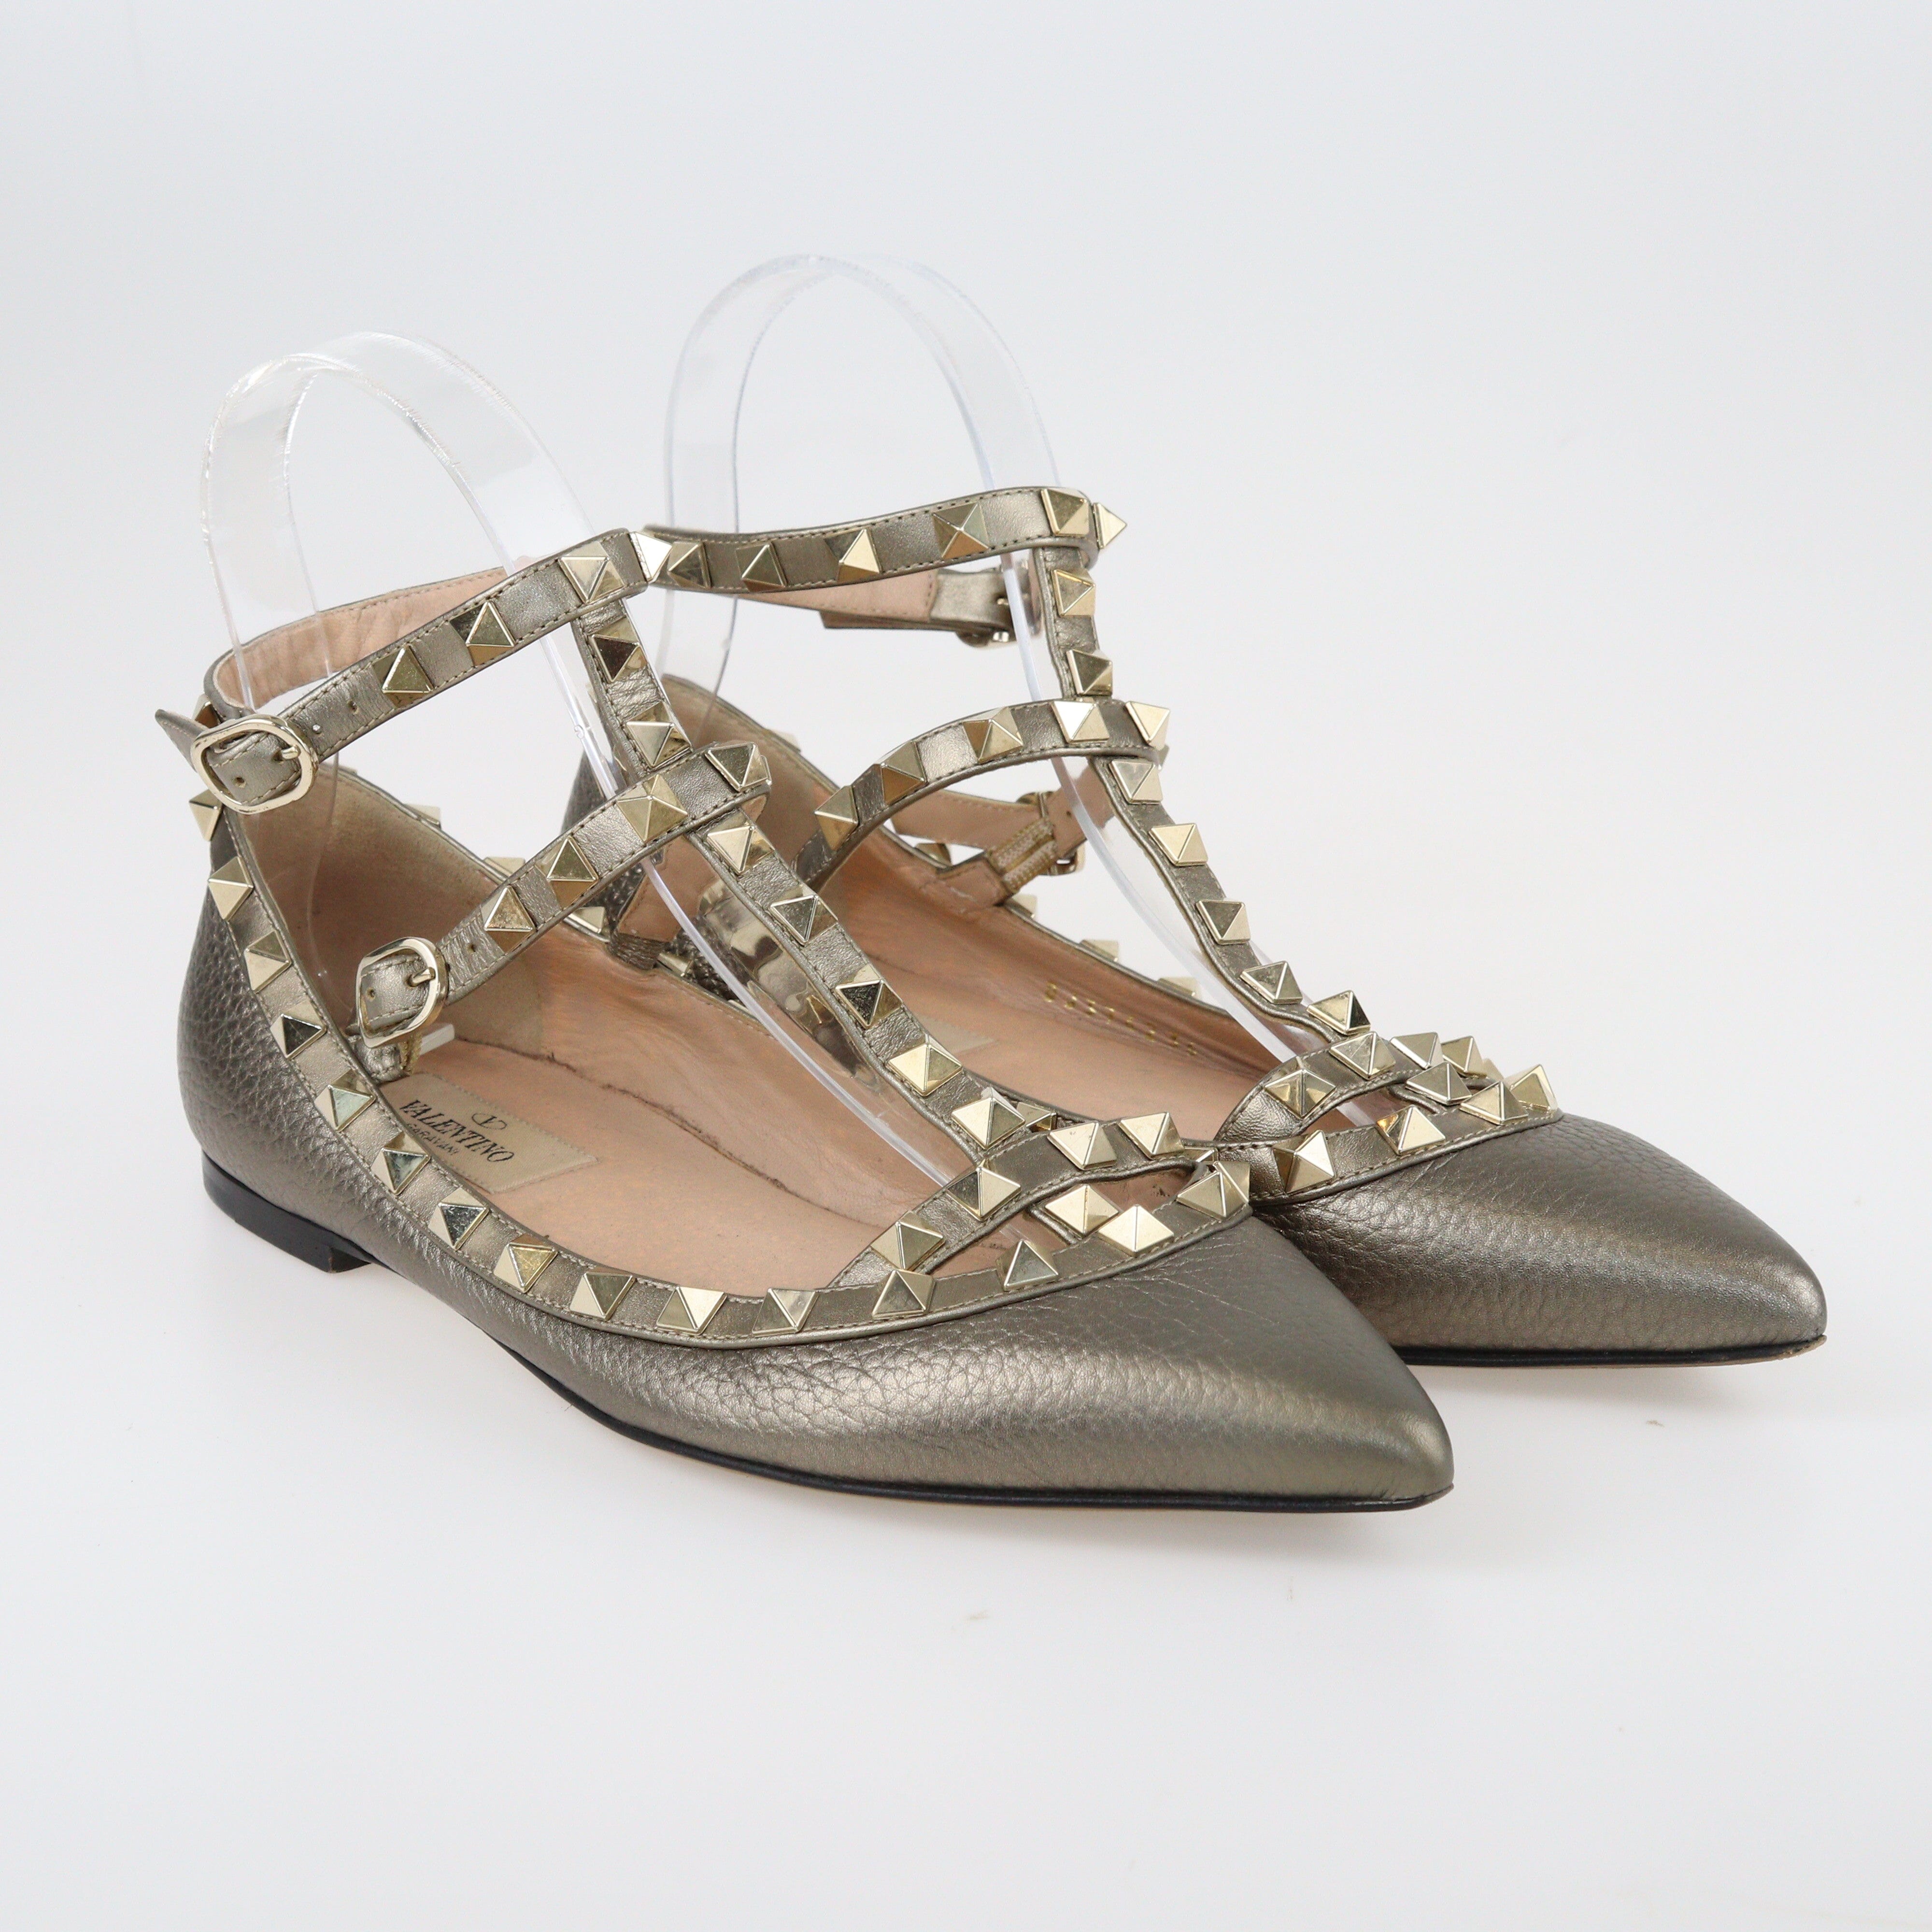 Green Studded Ankle Strap Pointed Toe Ballet Flats Shoes Valentino 